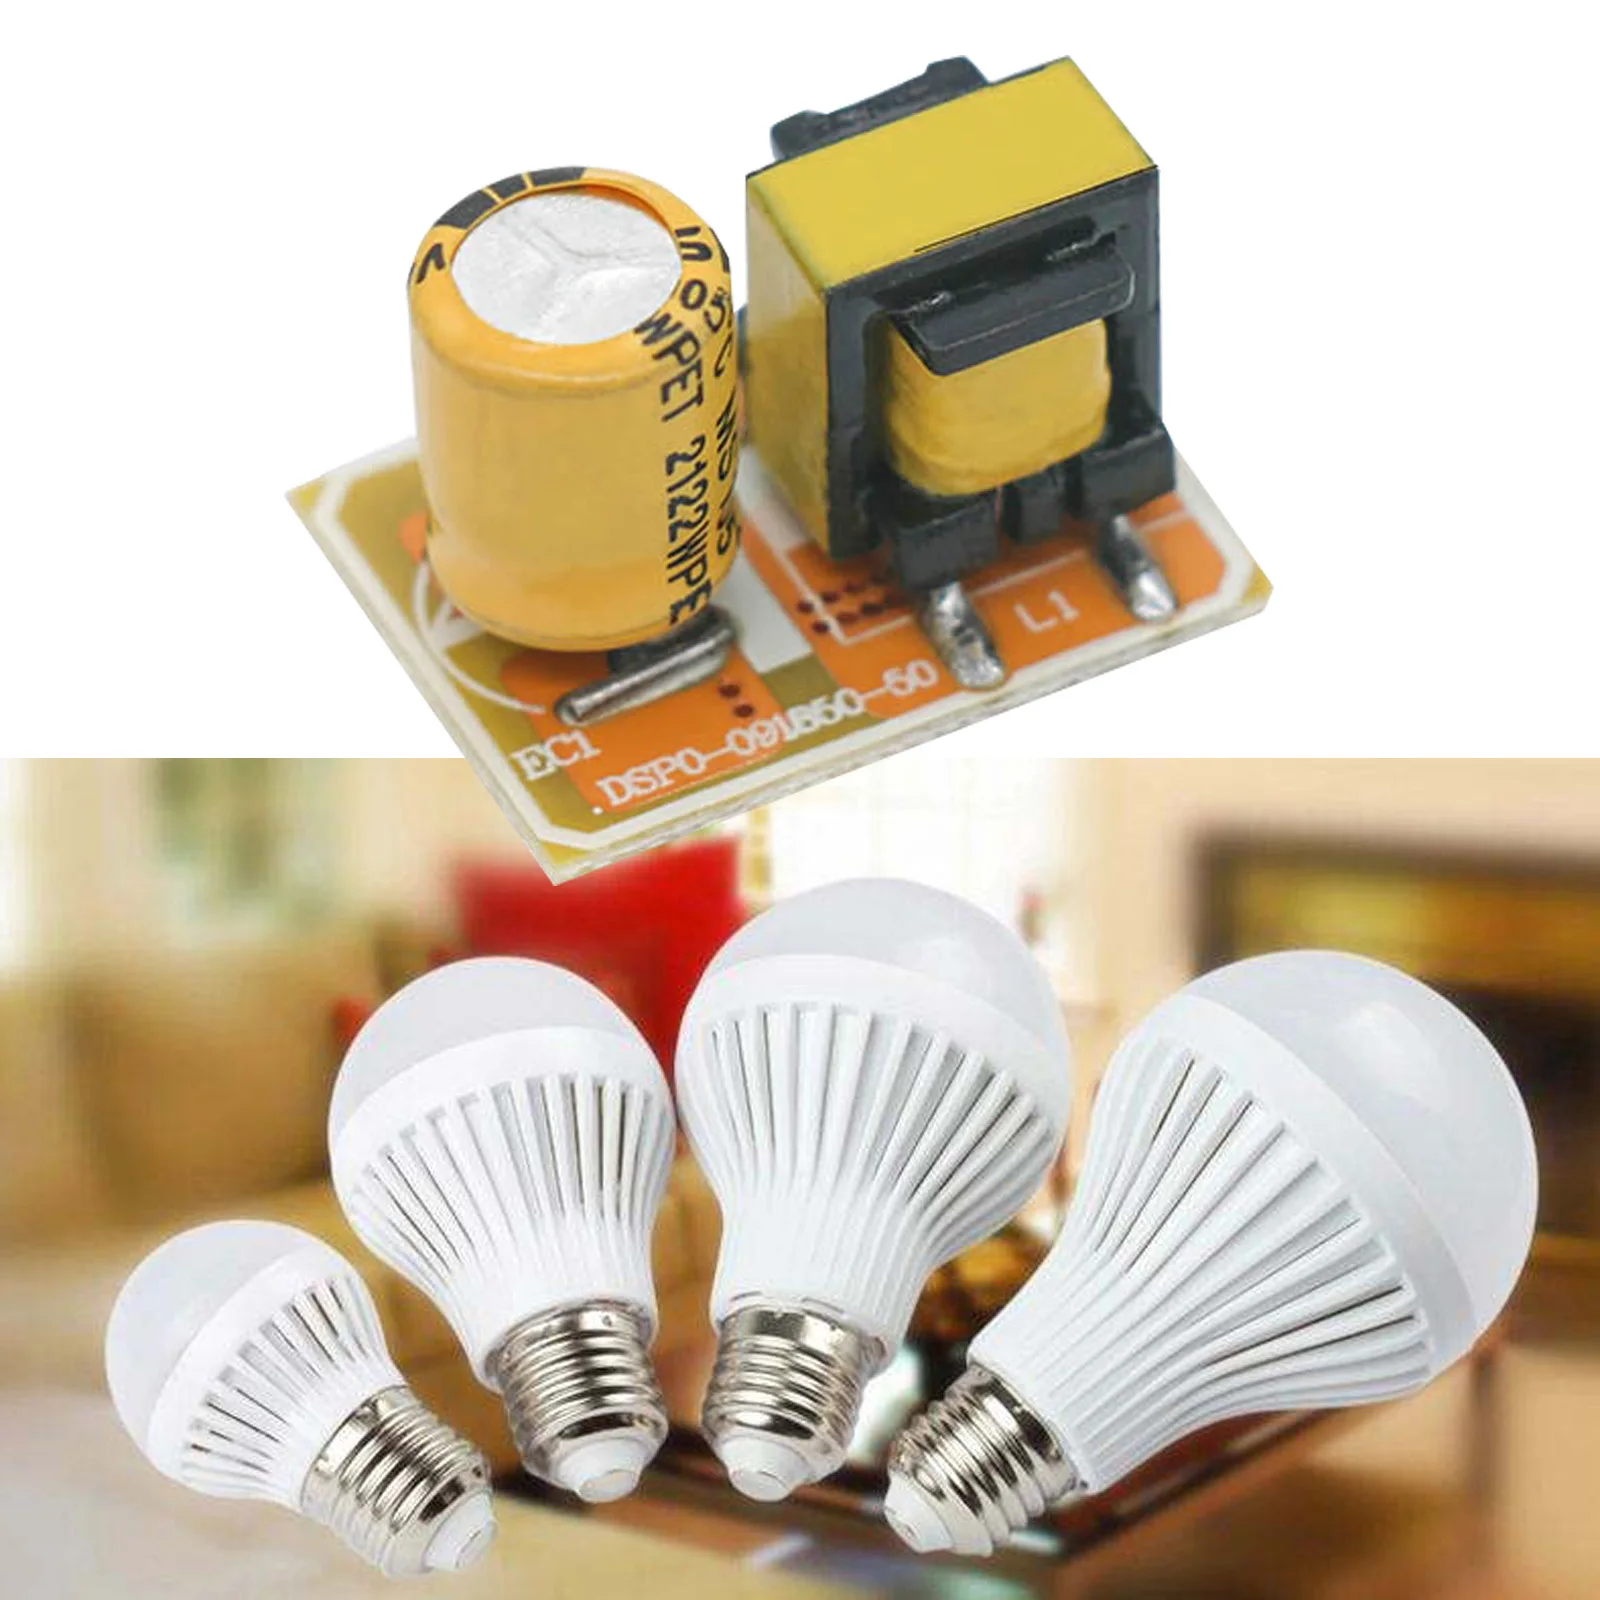 10pcs LED Non-Isolated Driver Lighting Transformer 3-18W Power Adapter 115mA Current for LED Spotlight Bulb Driver Accessories